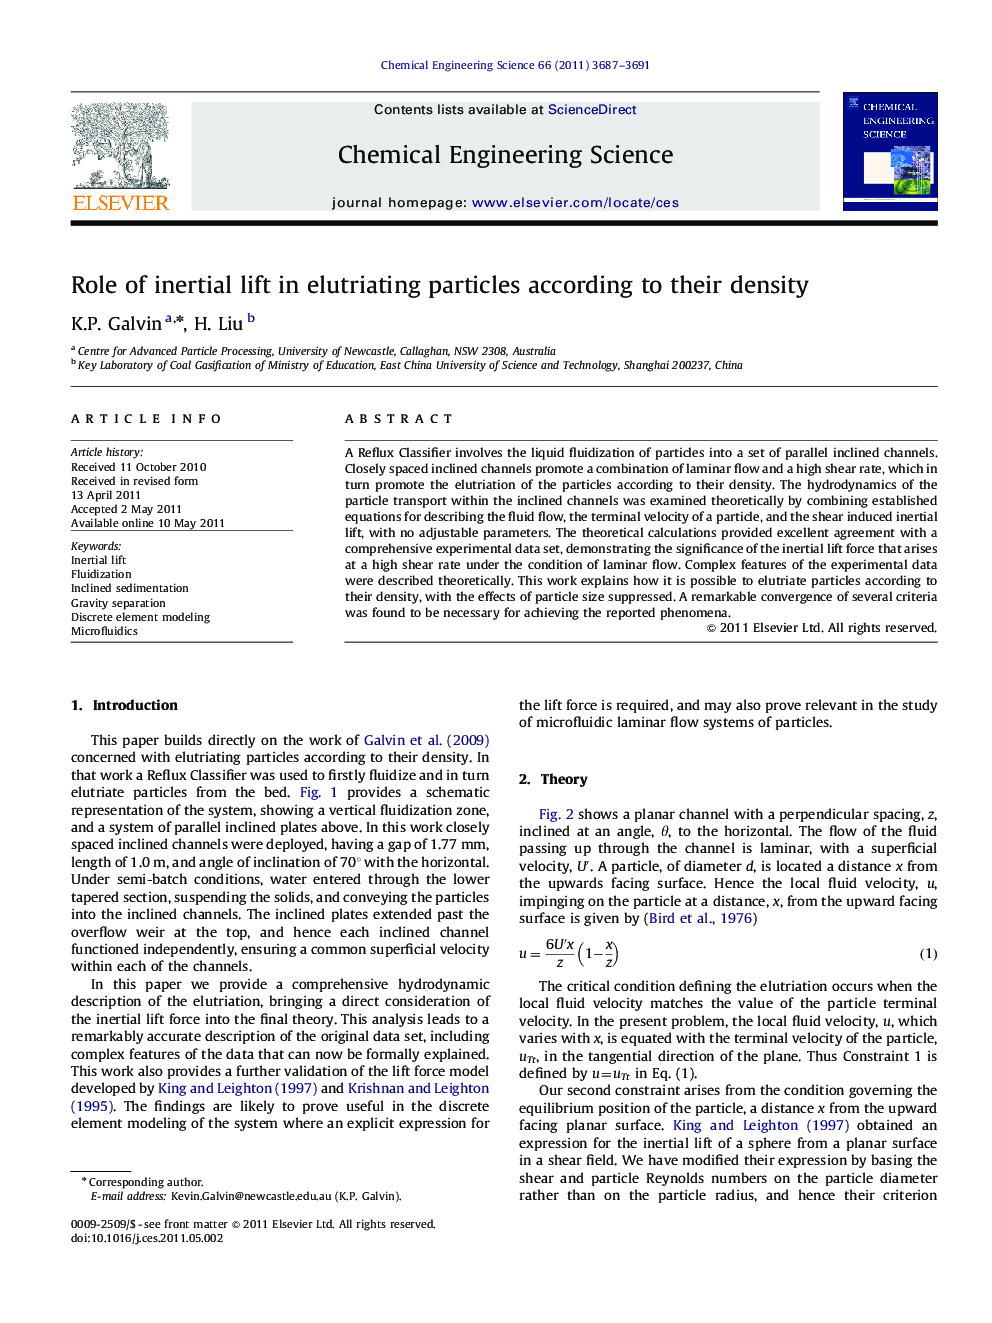 Role of inertial lift in elutriating particles according to their density